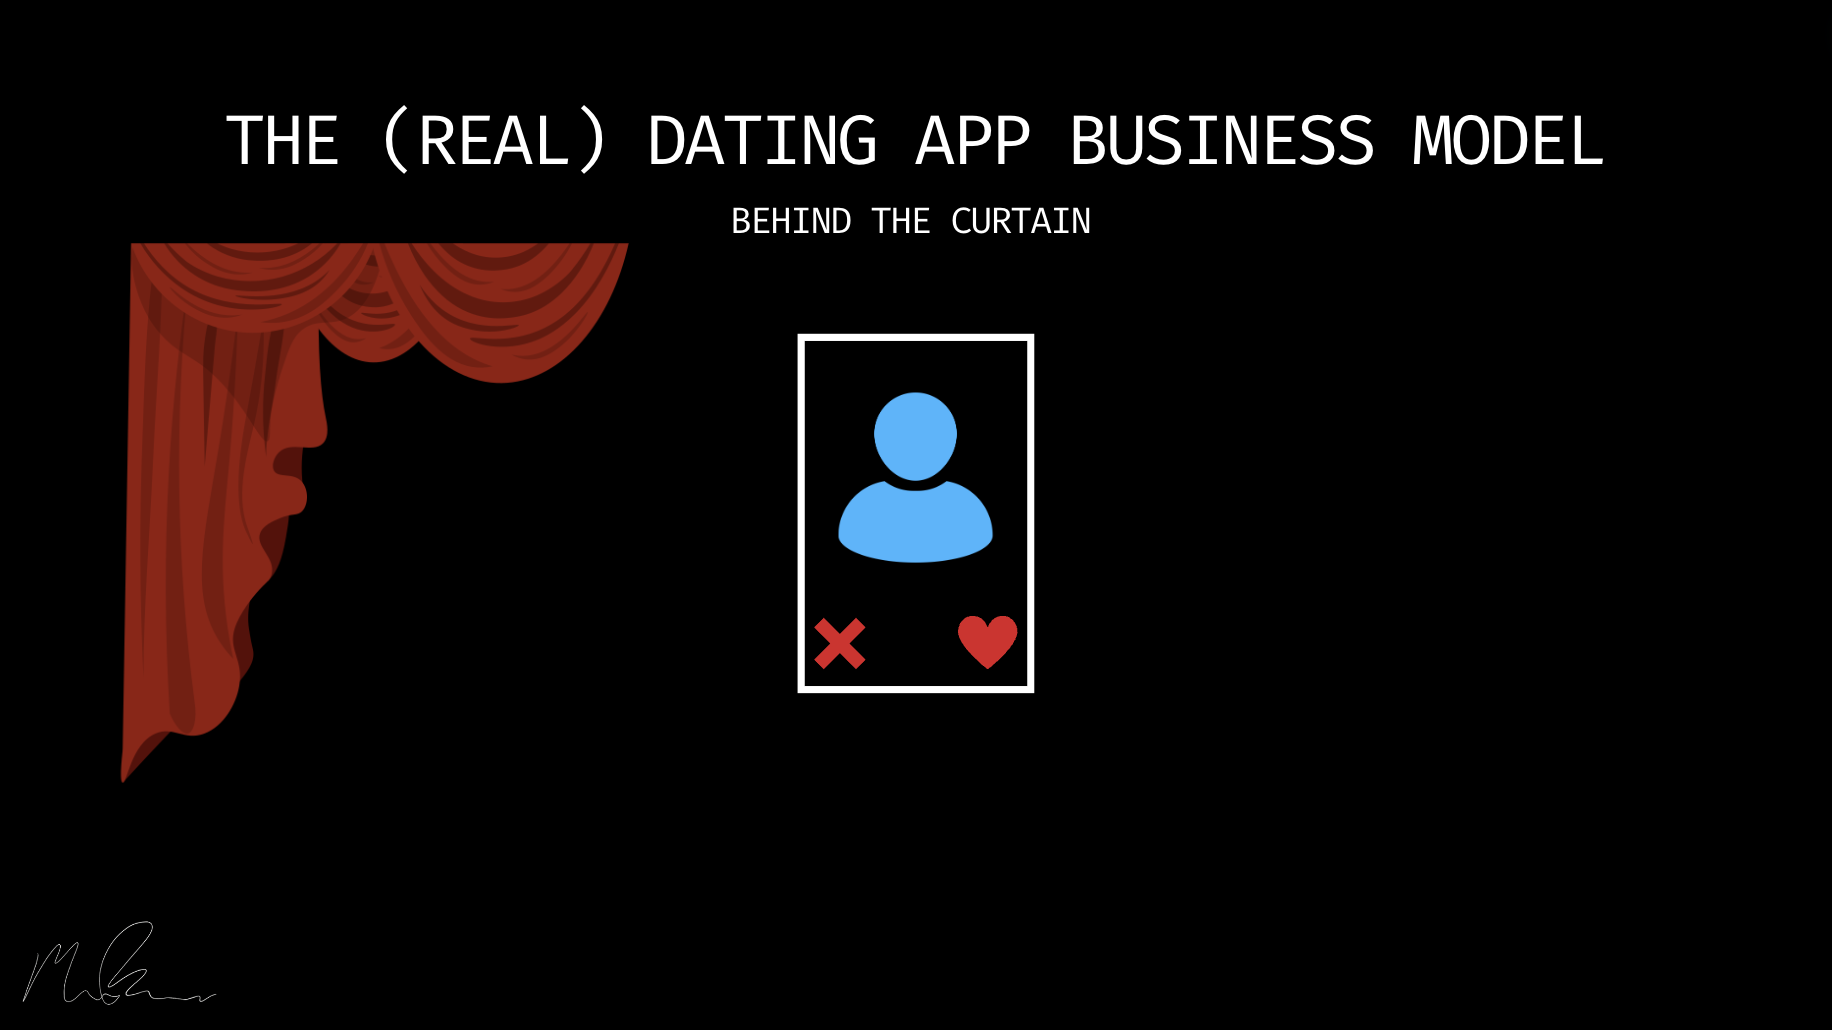 How Dating Apps Grow the ‘Hard Side’ of their Network